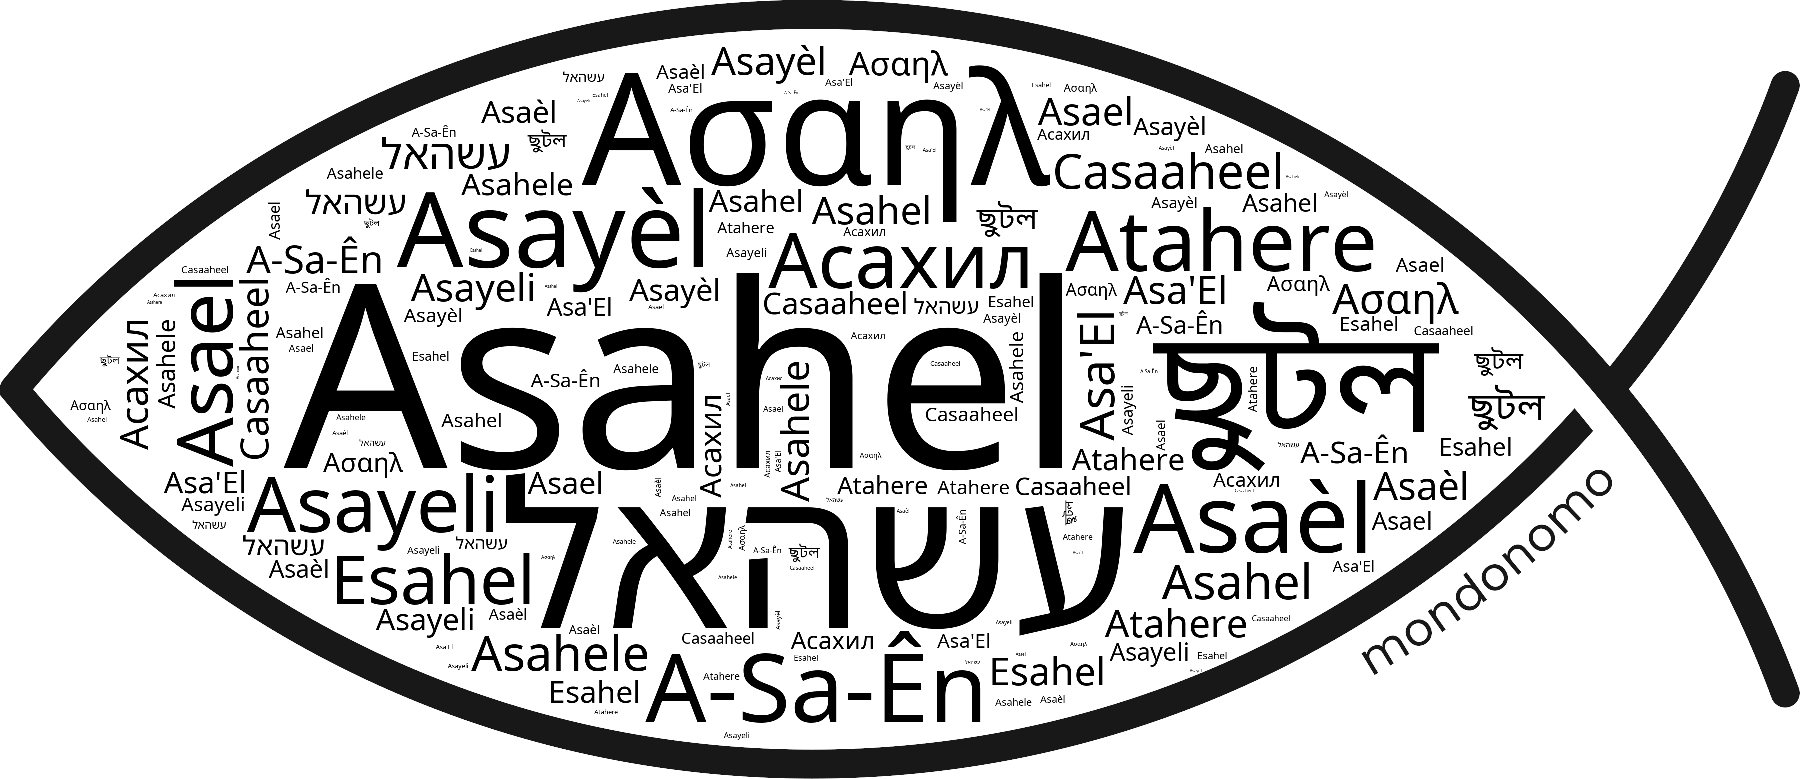 Name Asahel in the world's Bibles